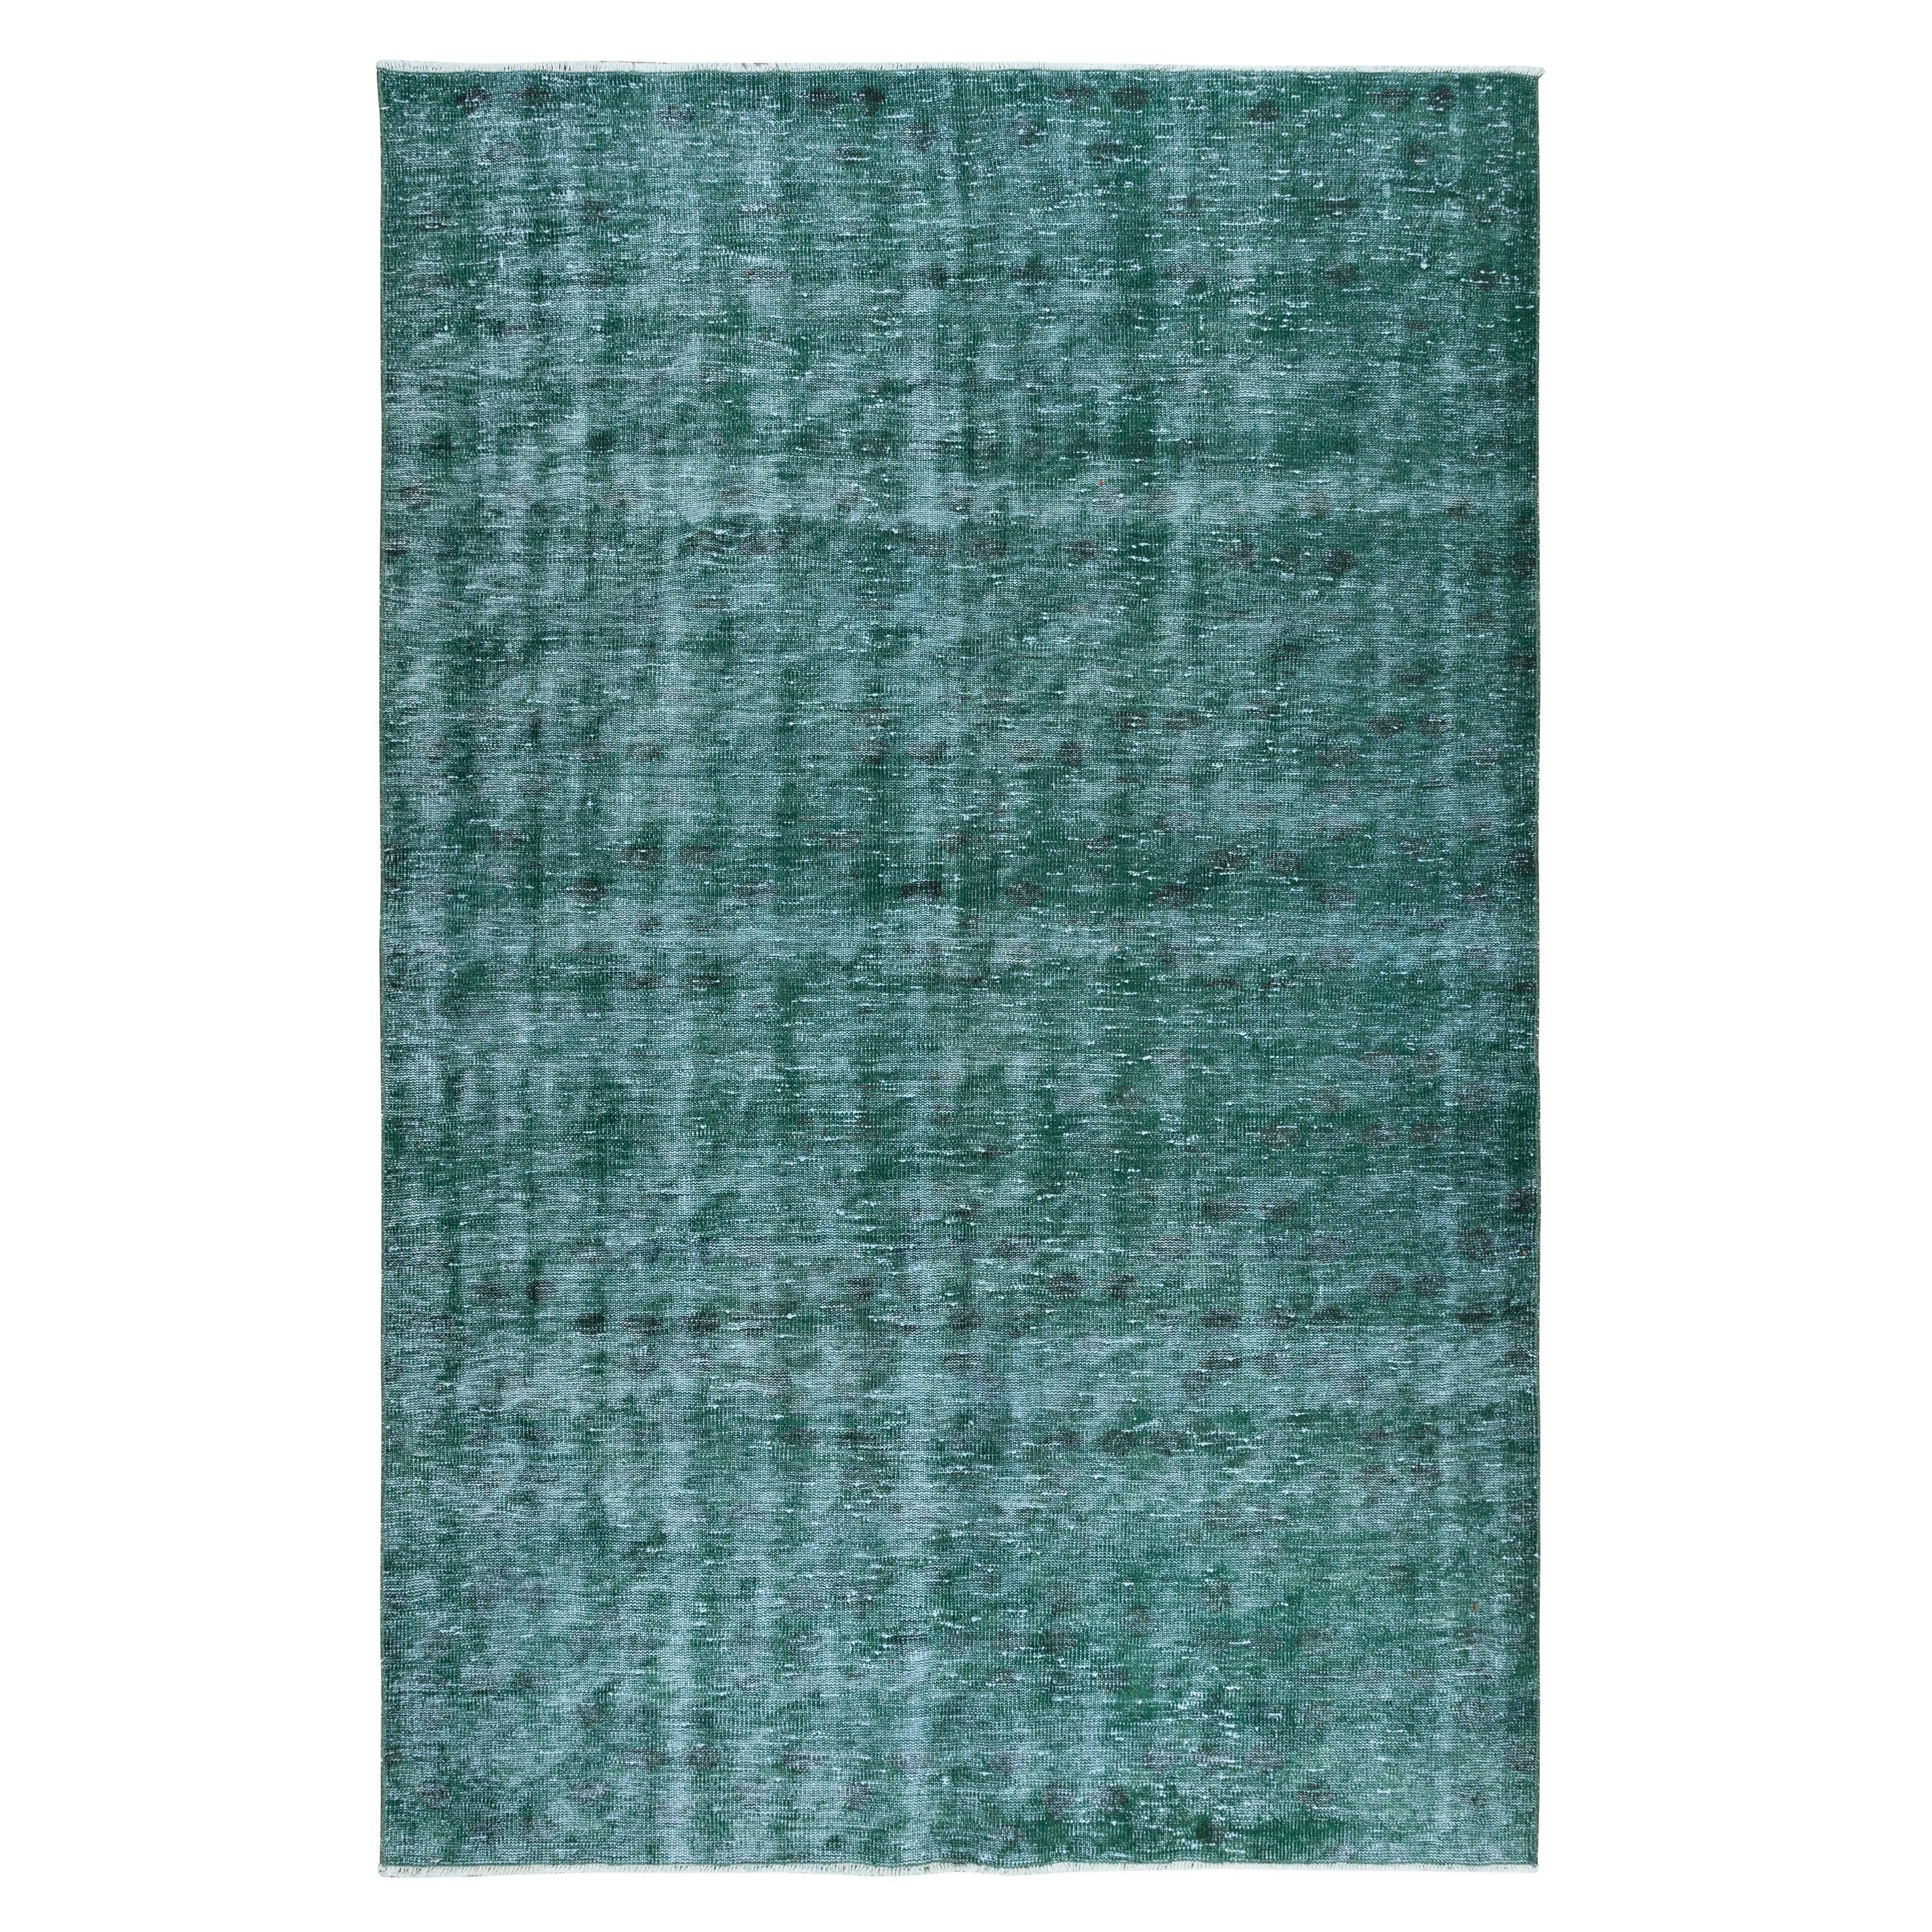 6x9.2 Ft Hand-Made Turkish Area Rug in Green, Contemporary Wool Upcycled Carpet For Sale